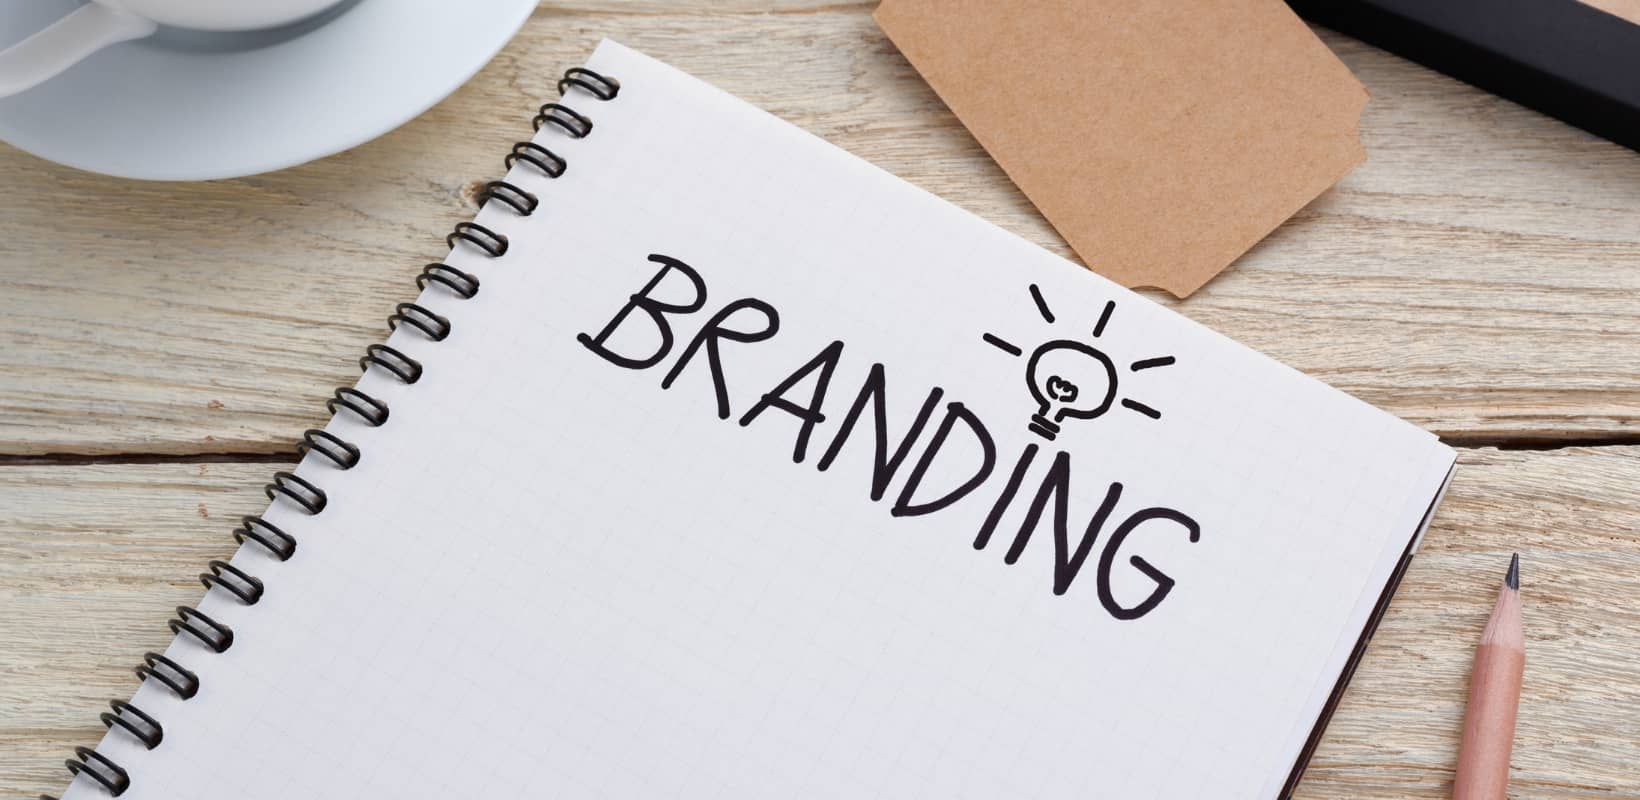 6 Things You Need To Know To Build Brand Equity Effectively